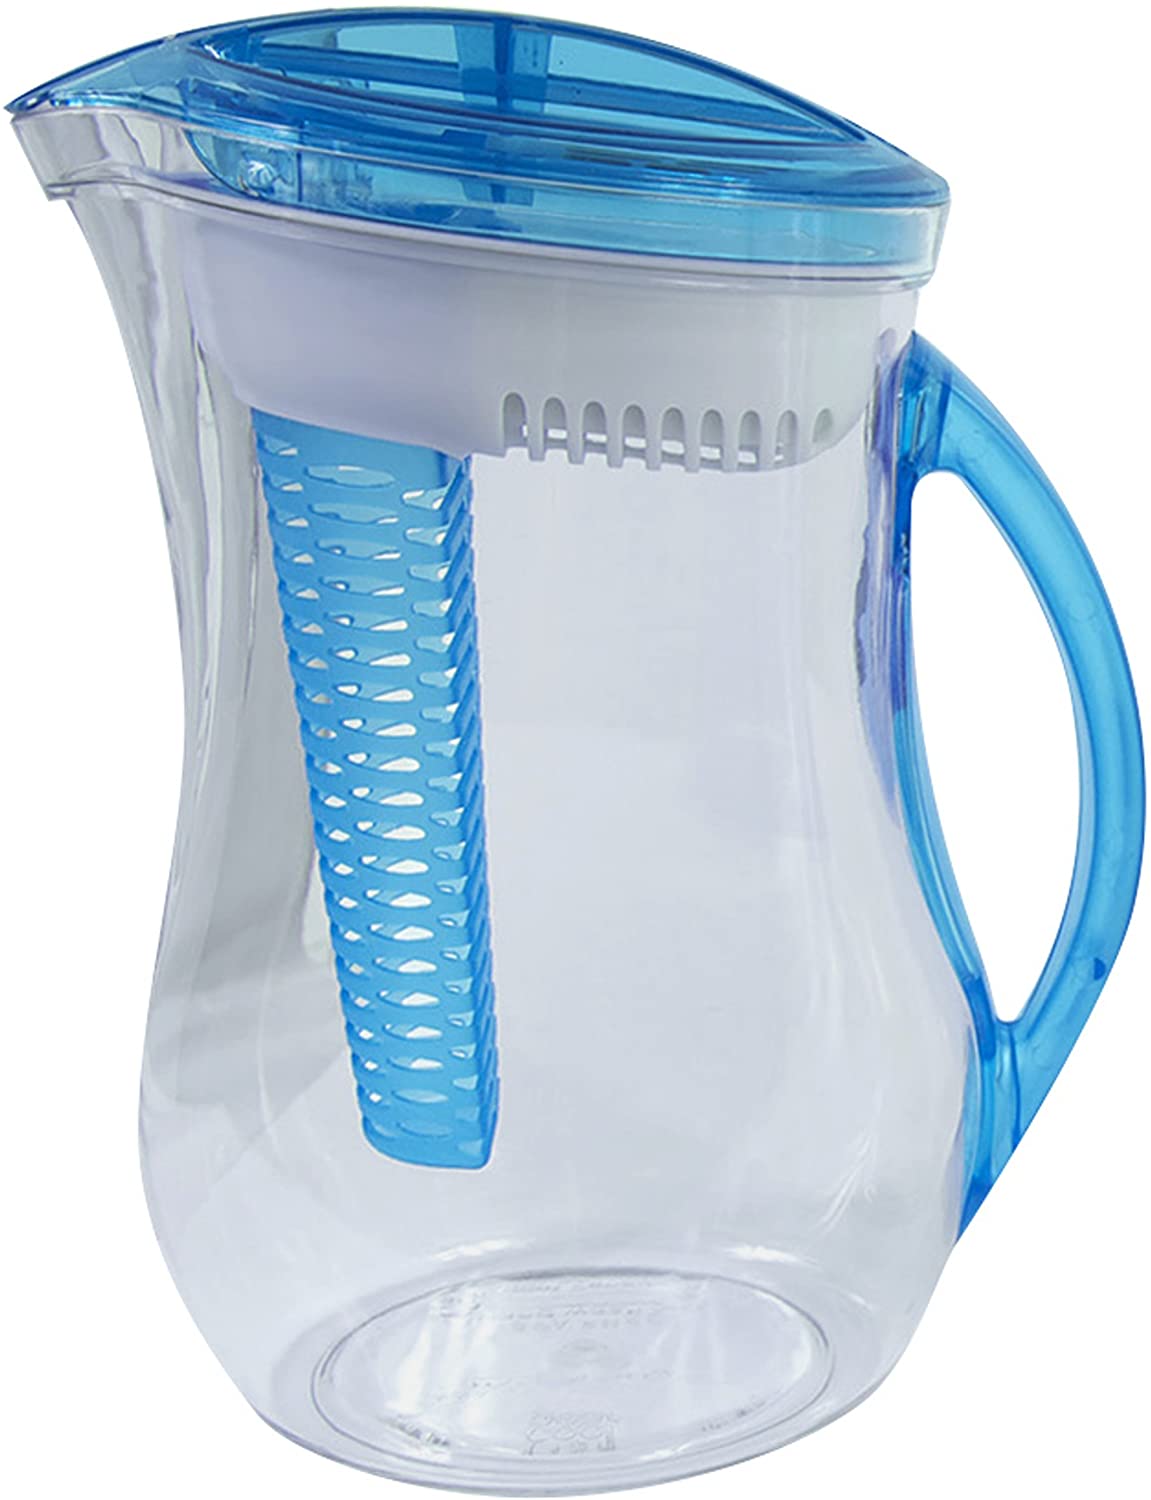 Cool Gear Water Filter Filtration Infuser Pitcher Plus Fruit Tea Flavor Infusion 2.44 LIter, Blue | Decor Gifts and More